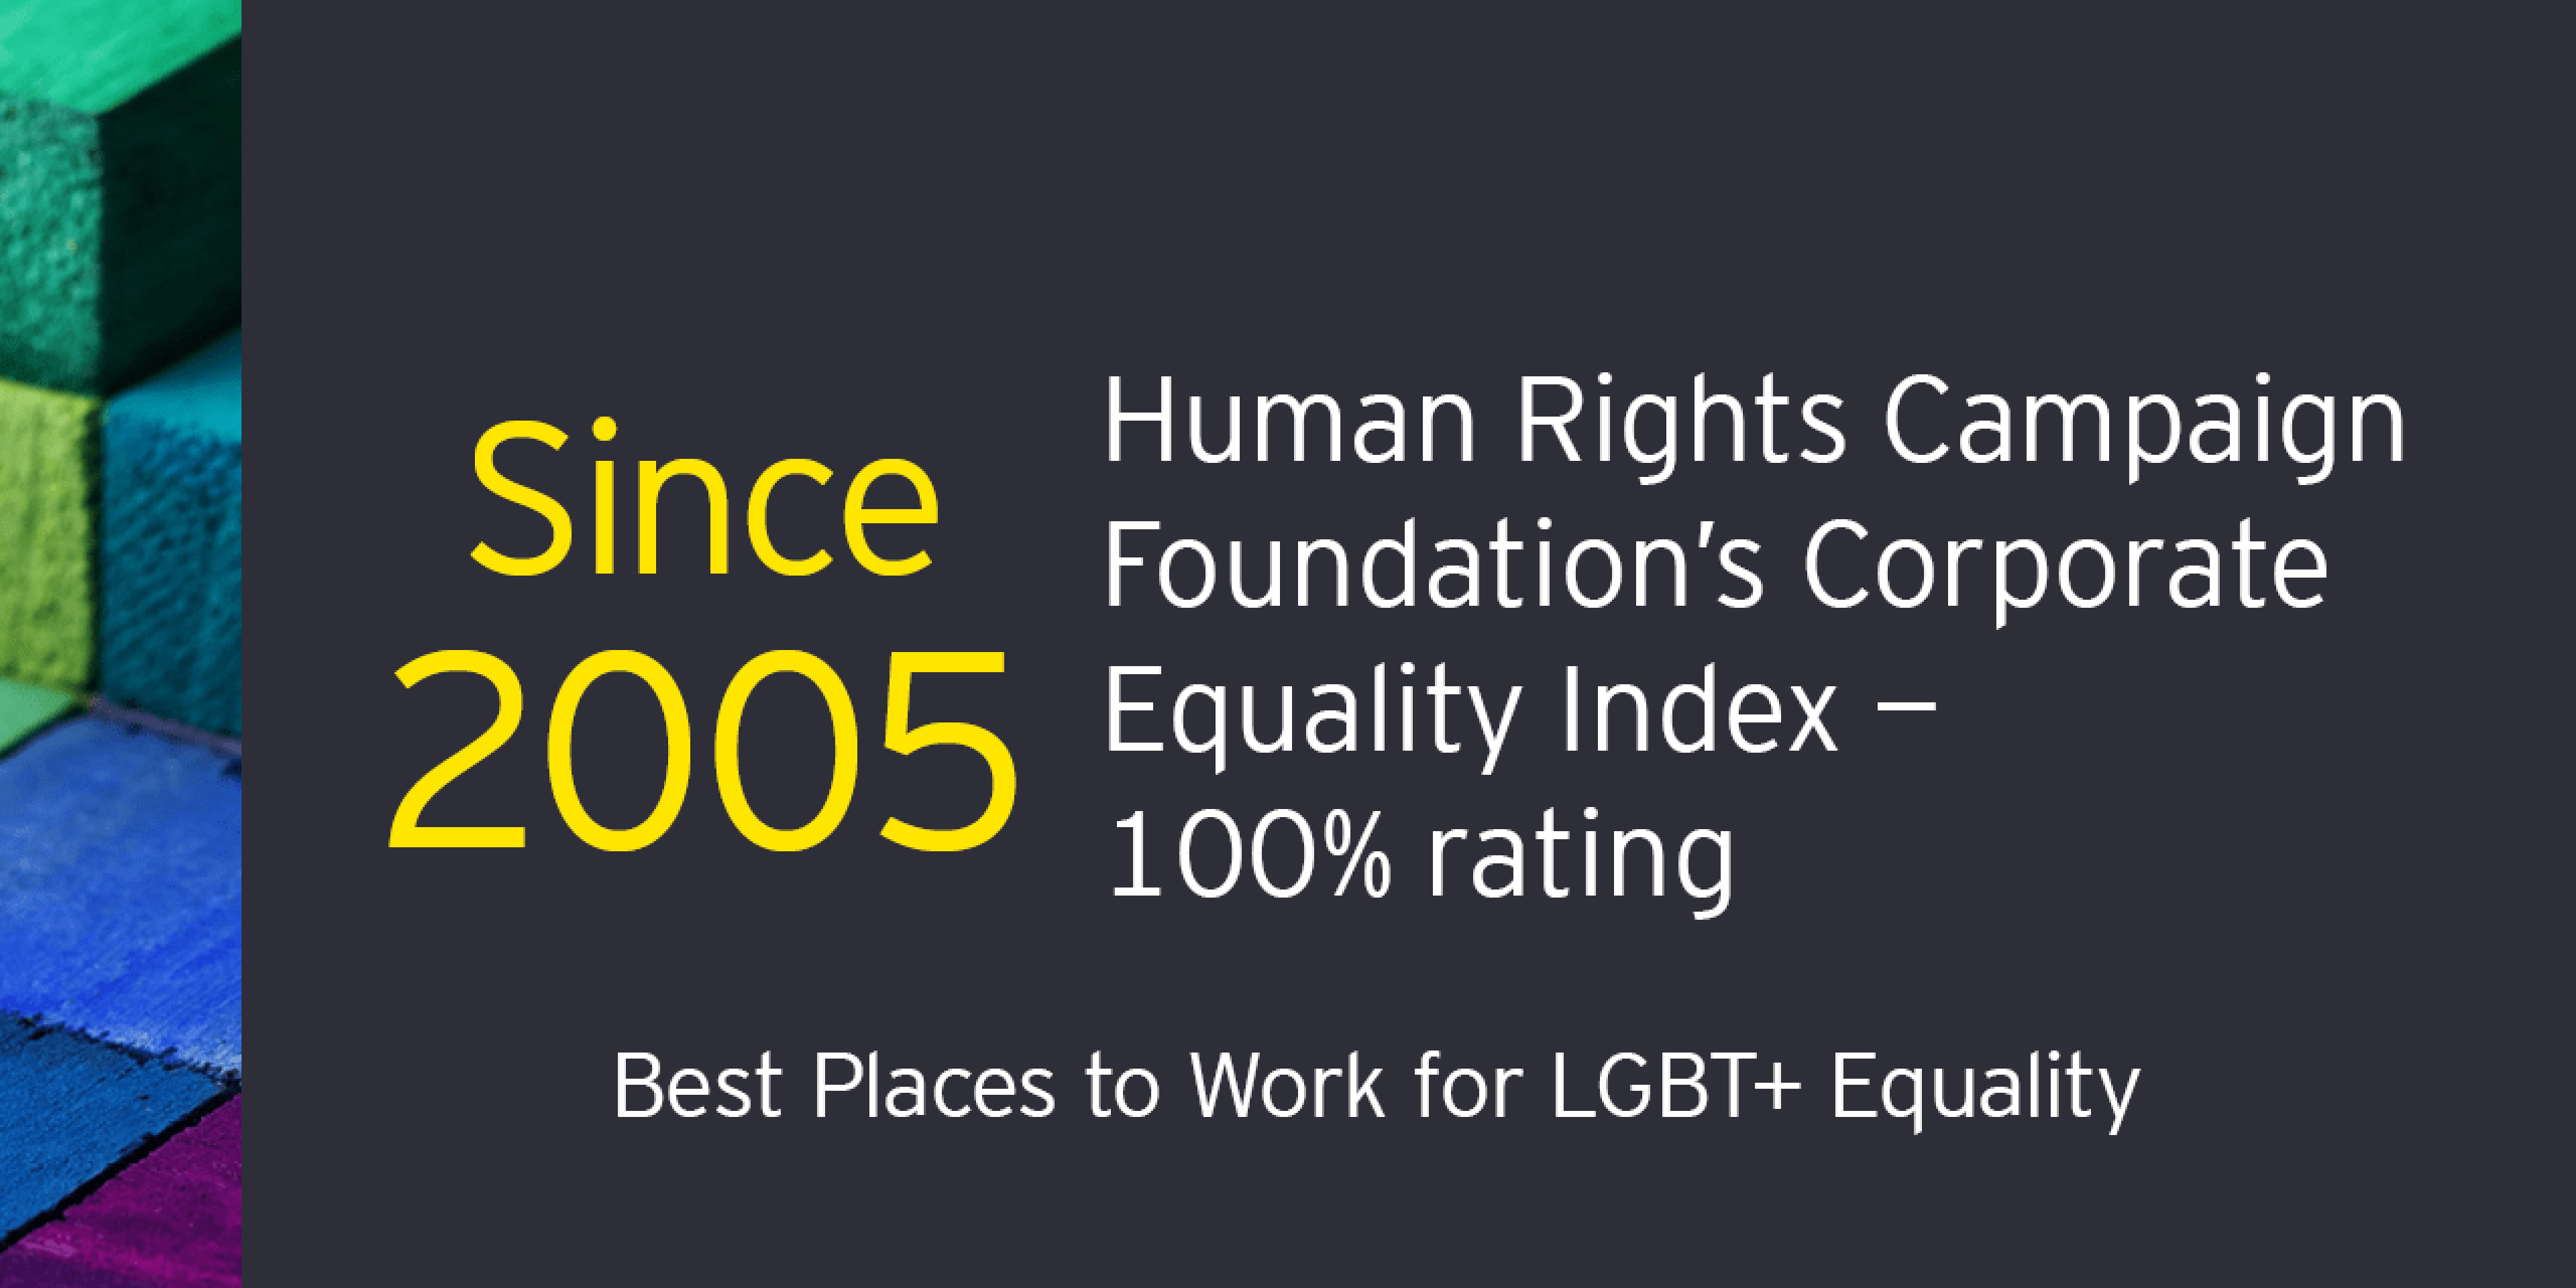 EY - Human Rights Campaign Foundation’s Corporate Equality Index 100% rating since 2005